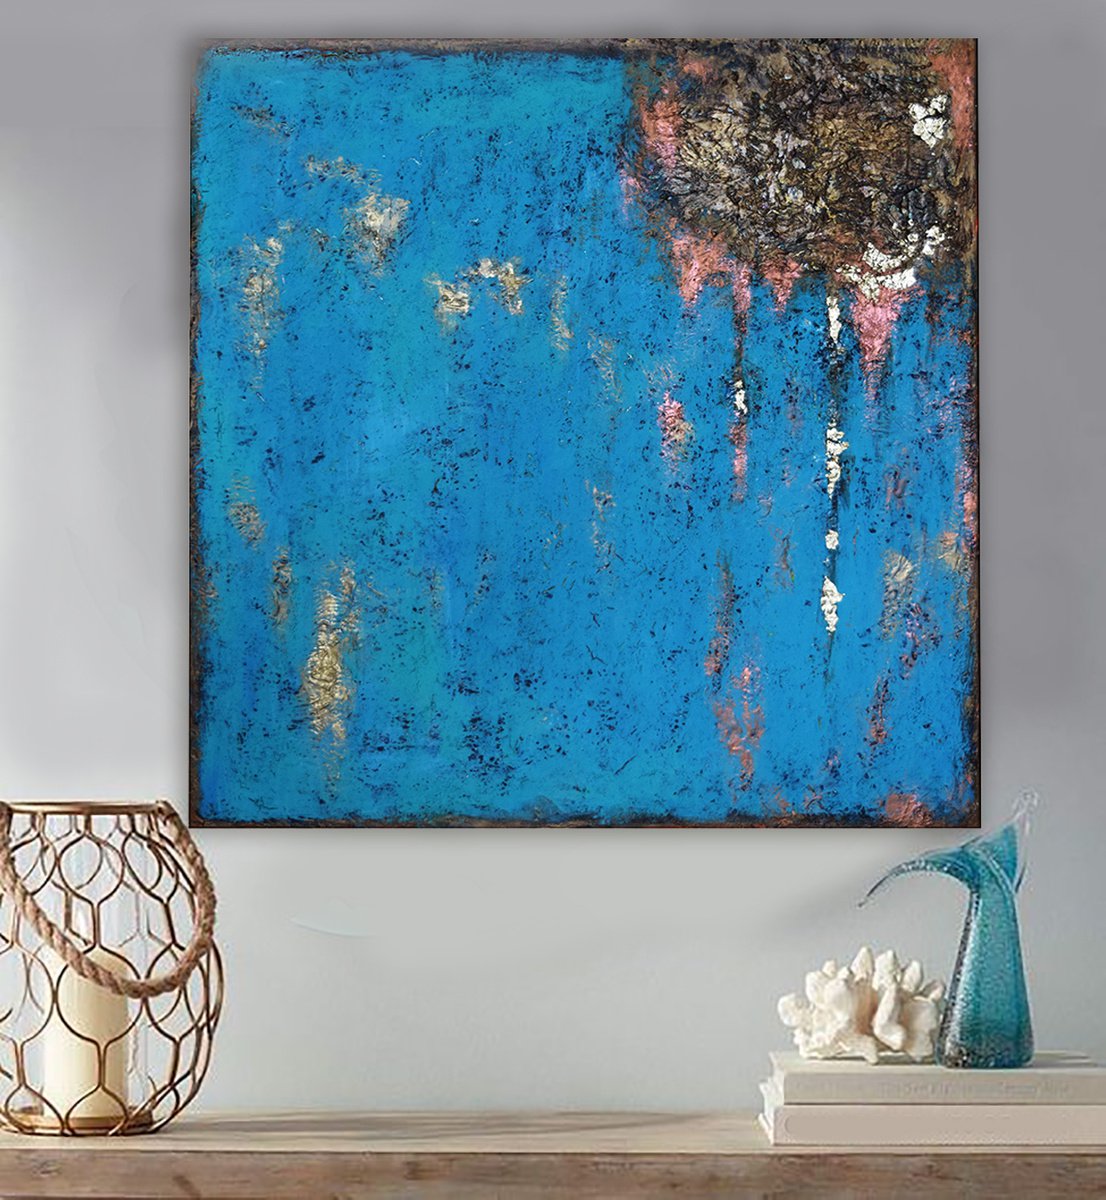 Dreamy Landscape Abstract painting 70 cm x 70 cm Teal Brown Gold leaf by Anna Sidi-Yacoub